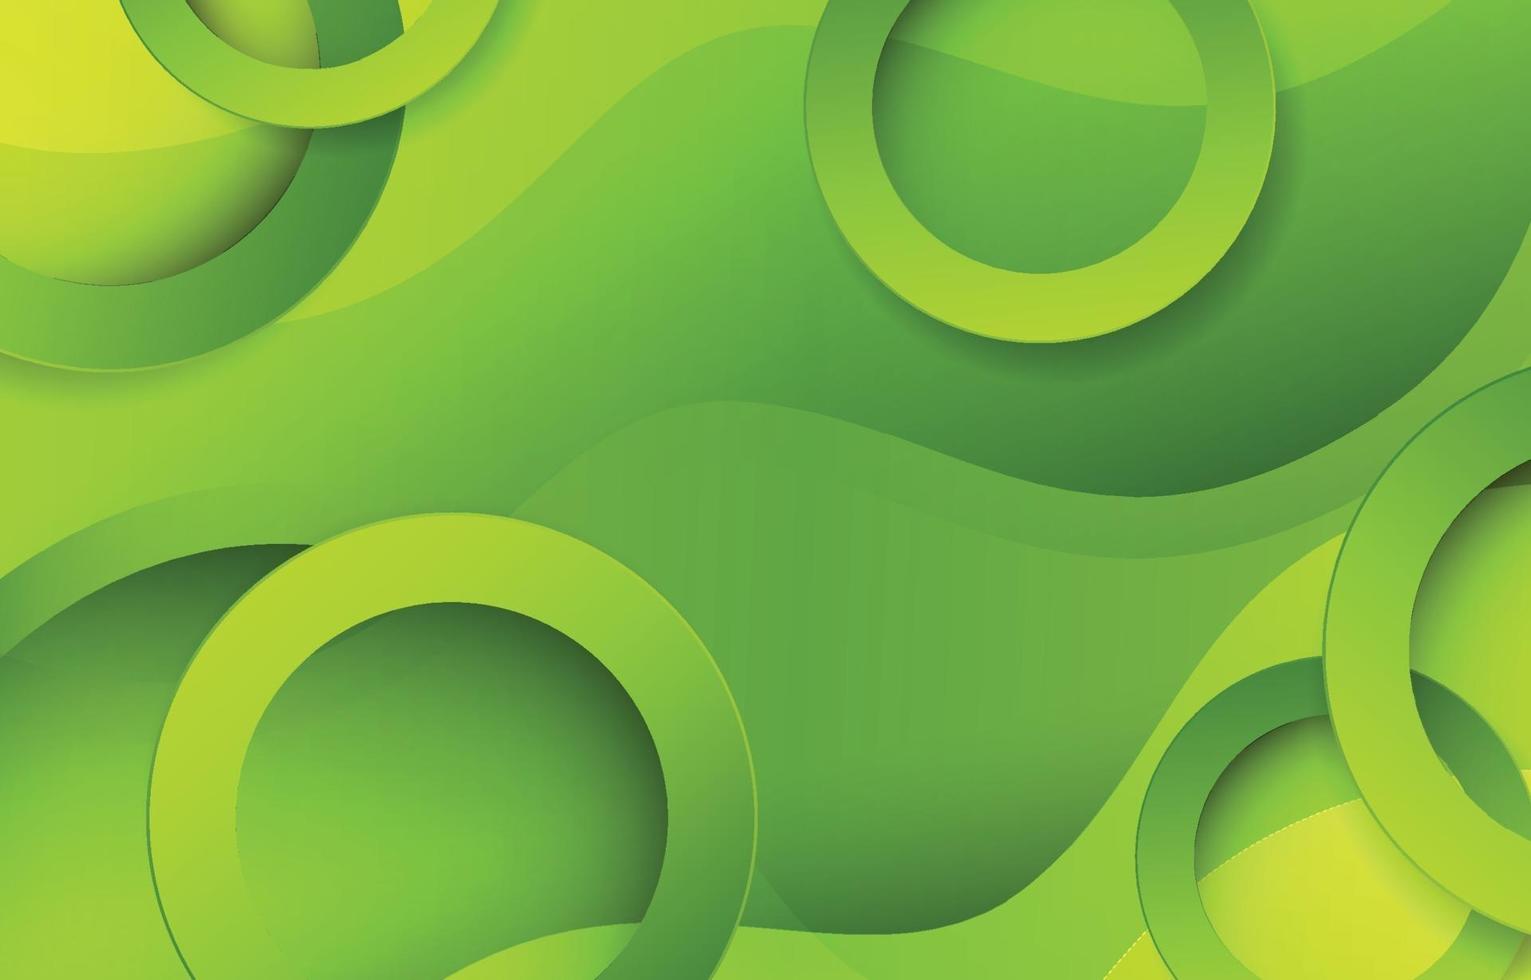 Green Abstract Wave with Circle Element vector